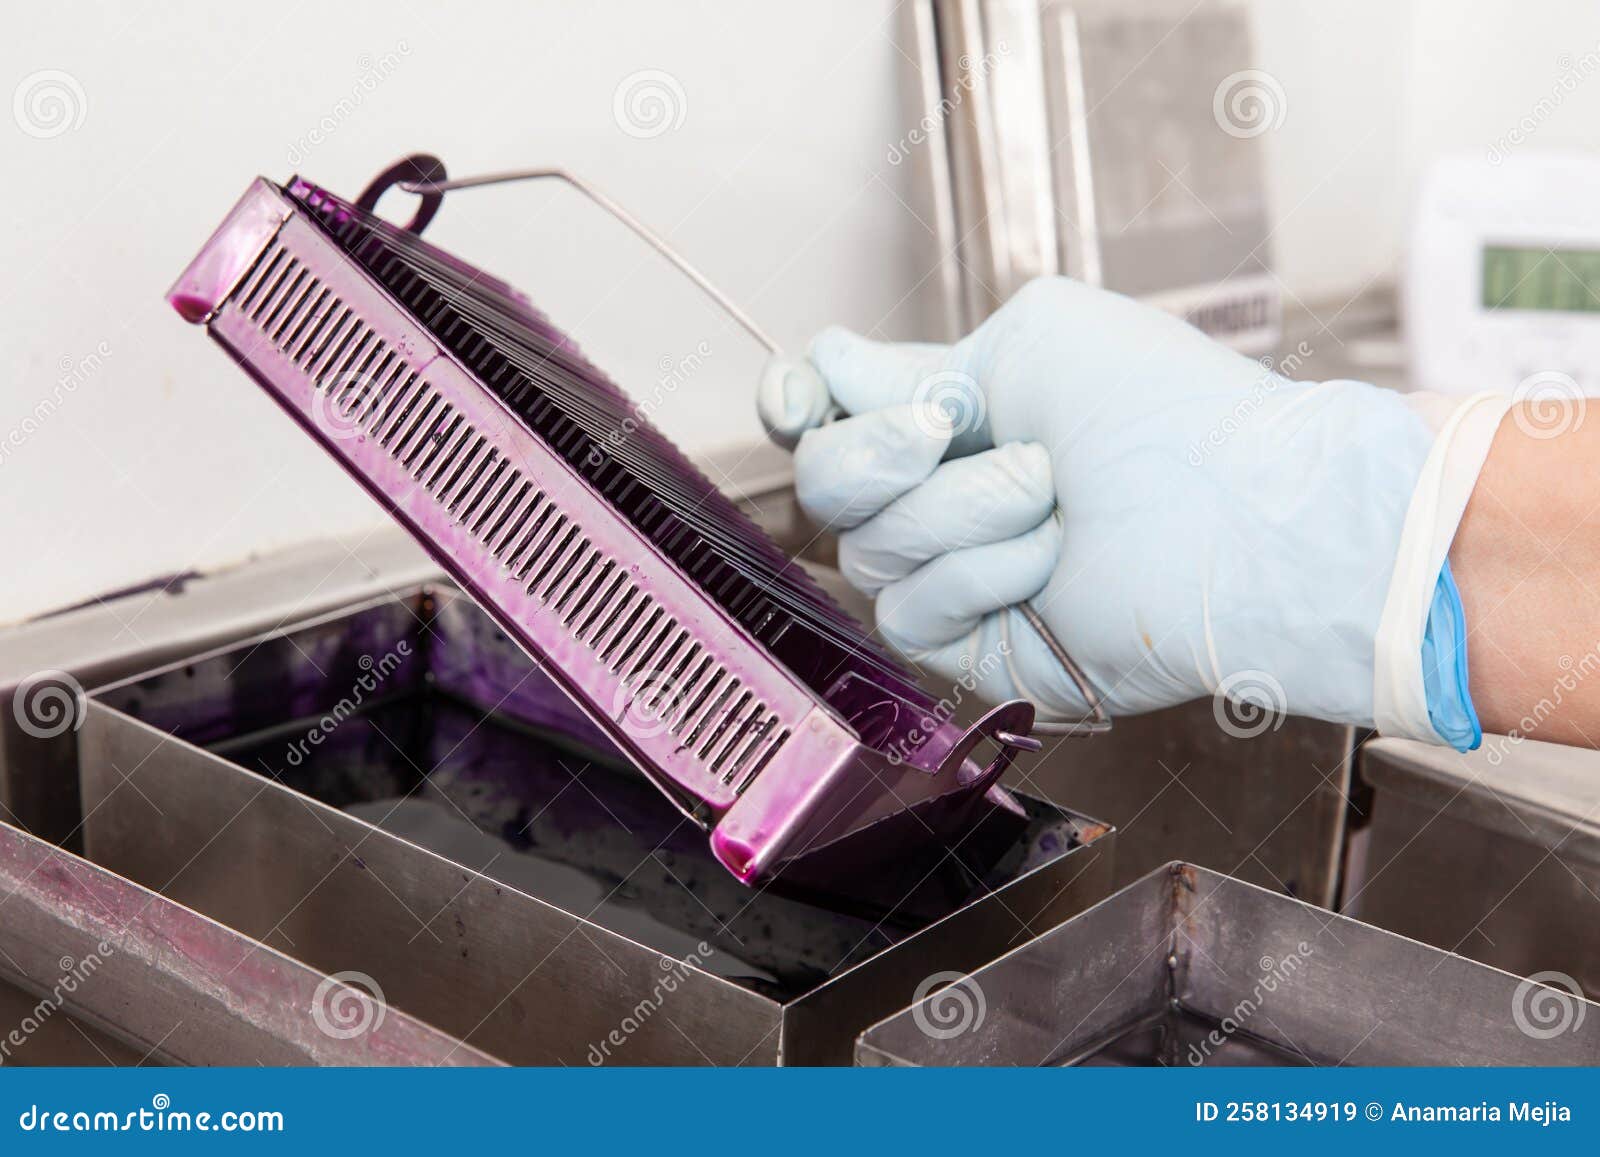 scientist staining microscope slides for cytology studies in the laboratory